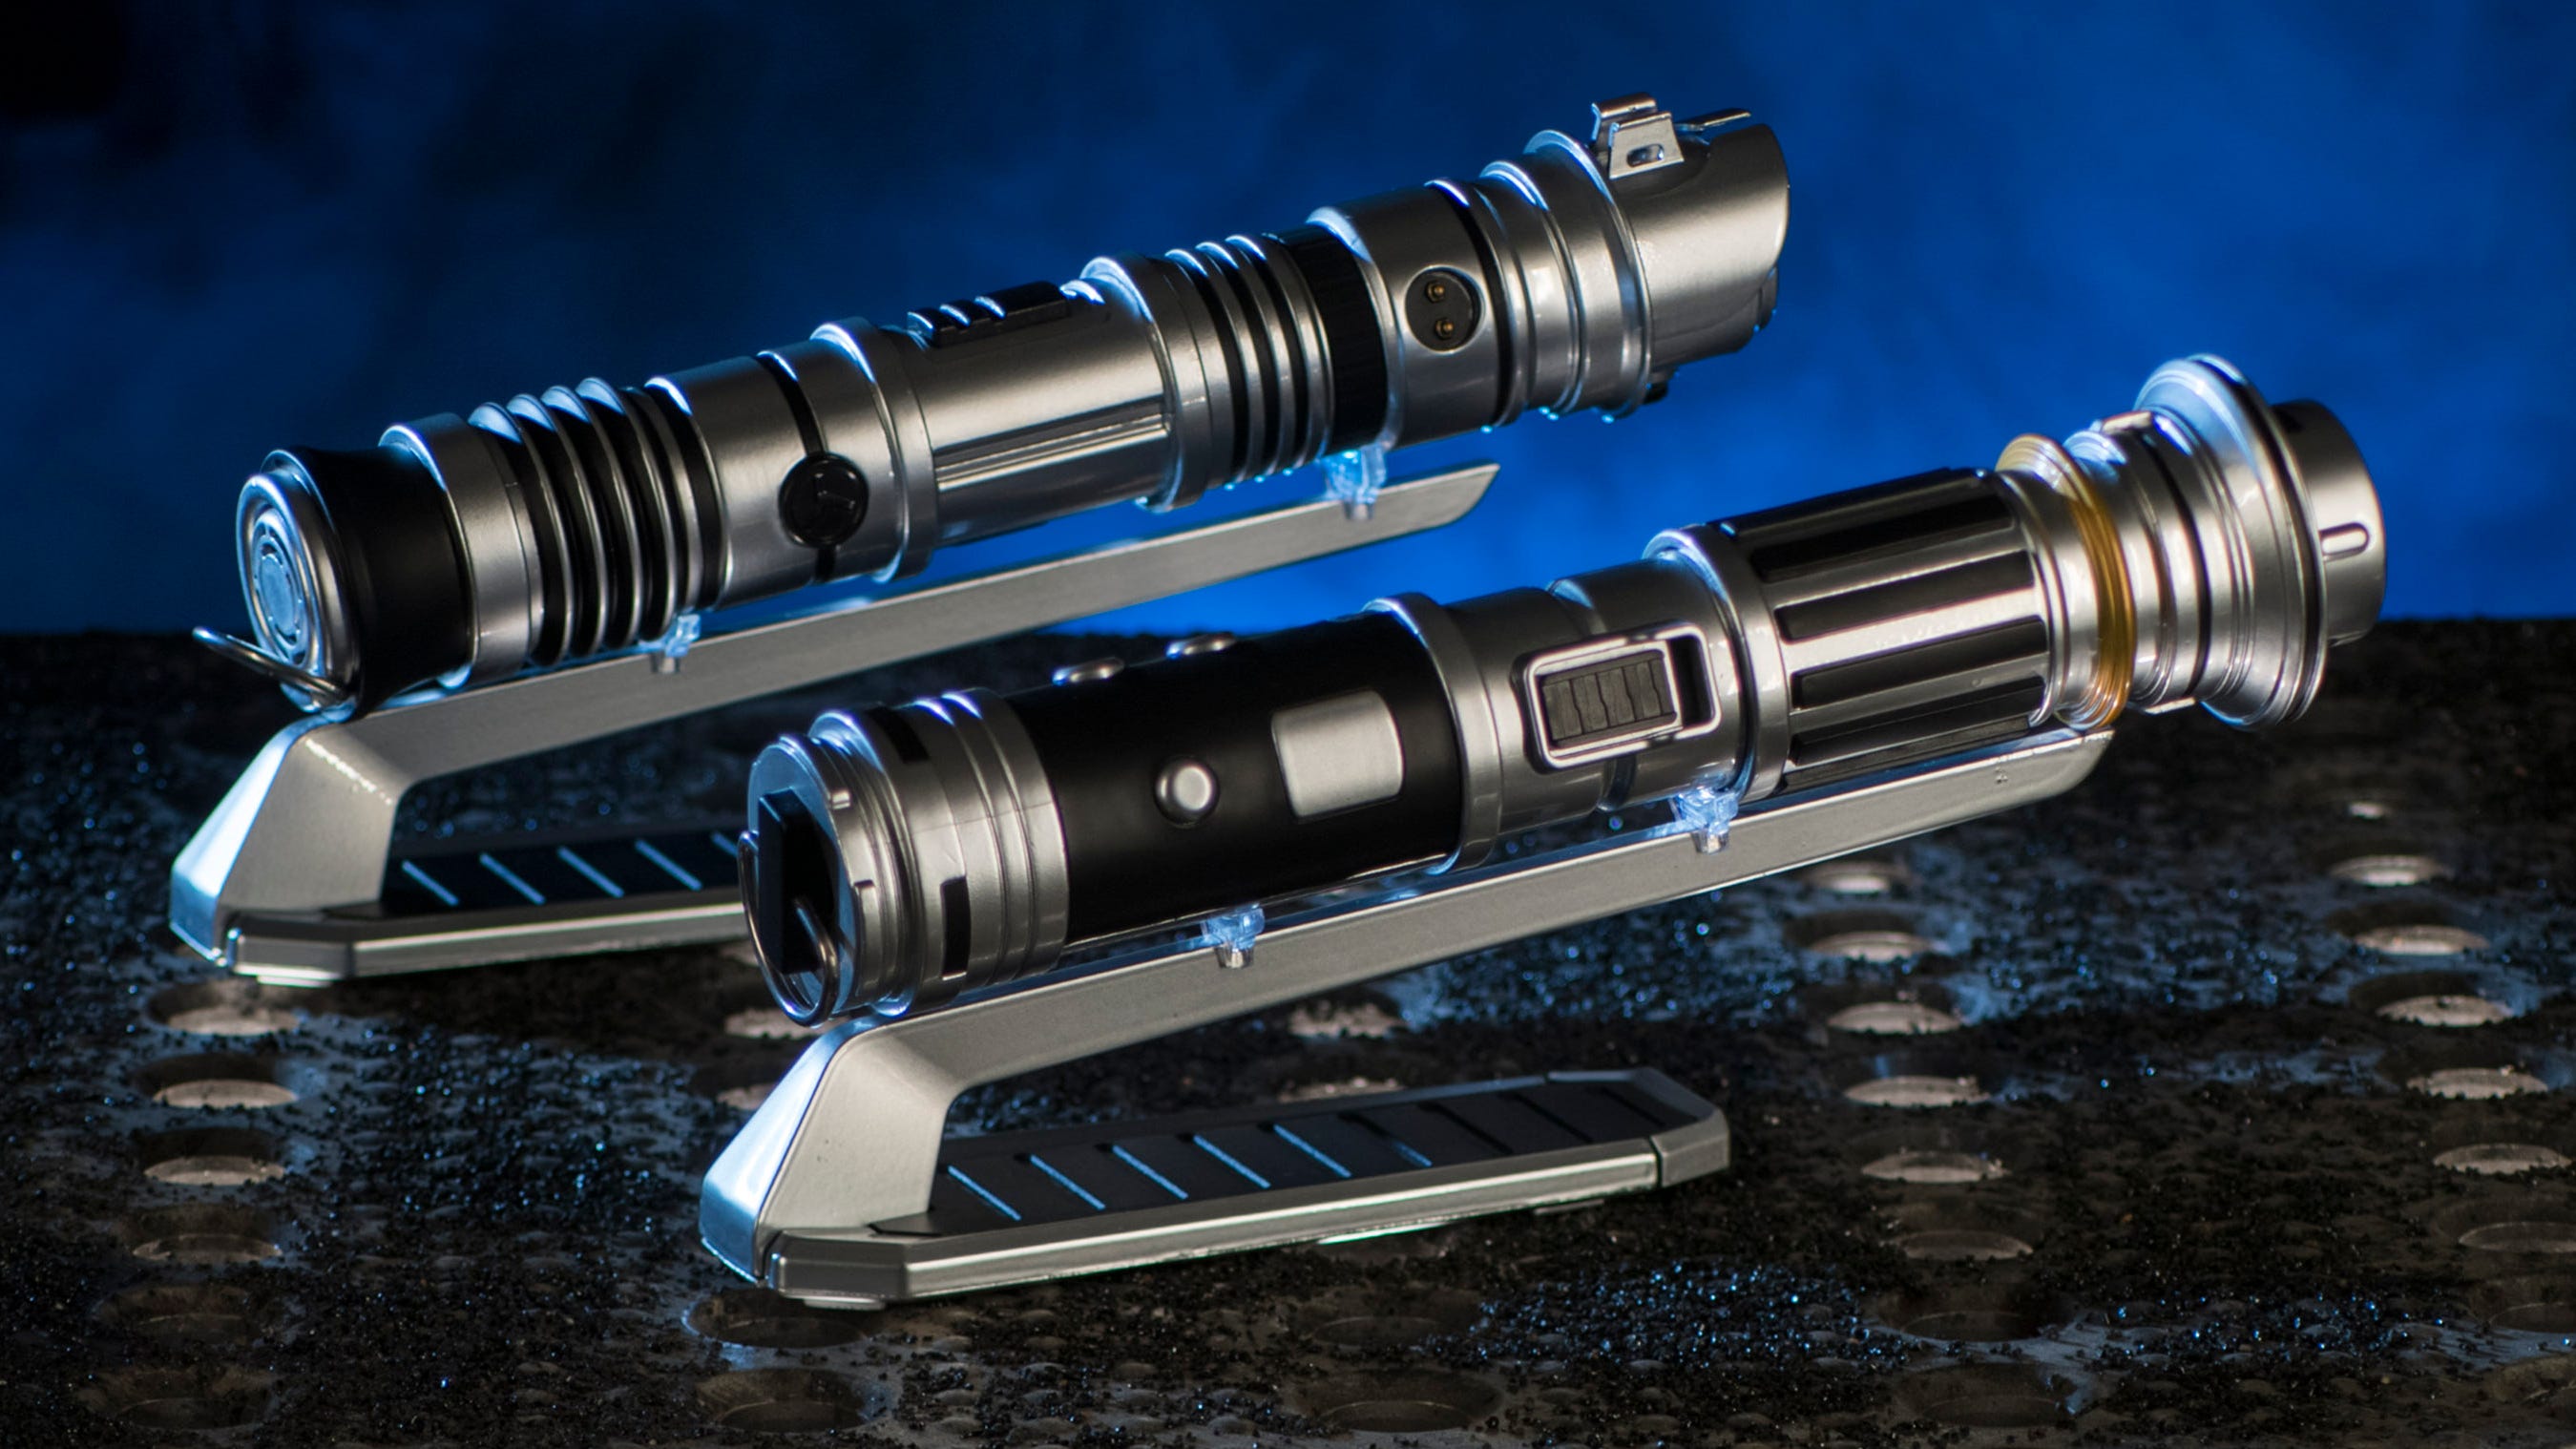 Can you fly with a Disneyland's Star Wars: Galaxy's Edge lightsaber?